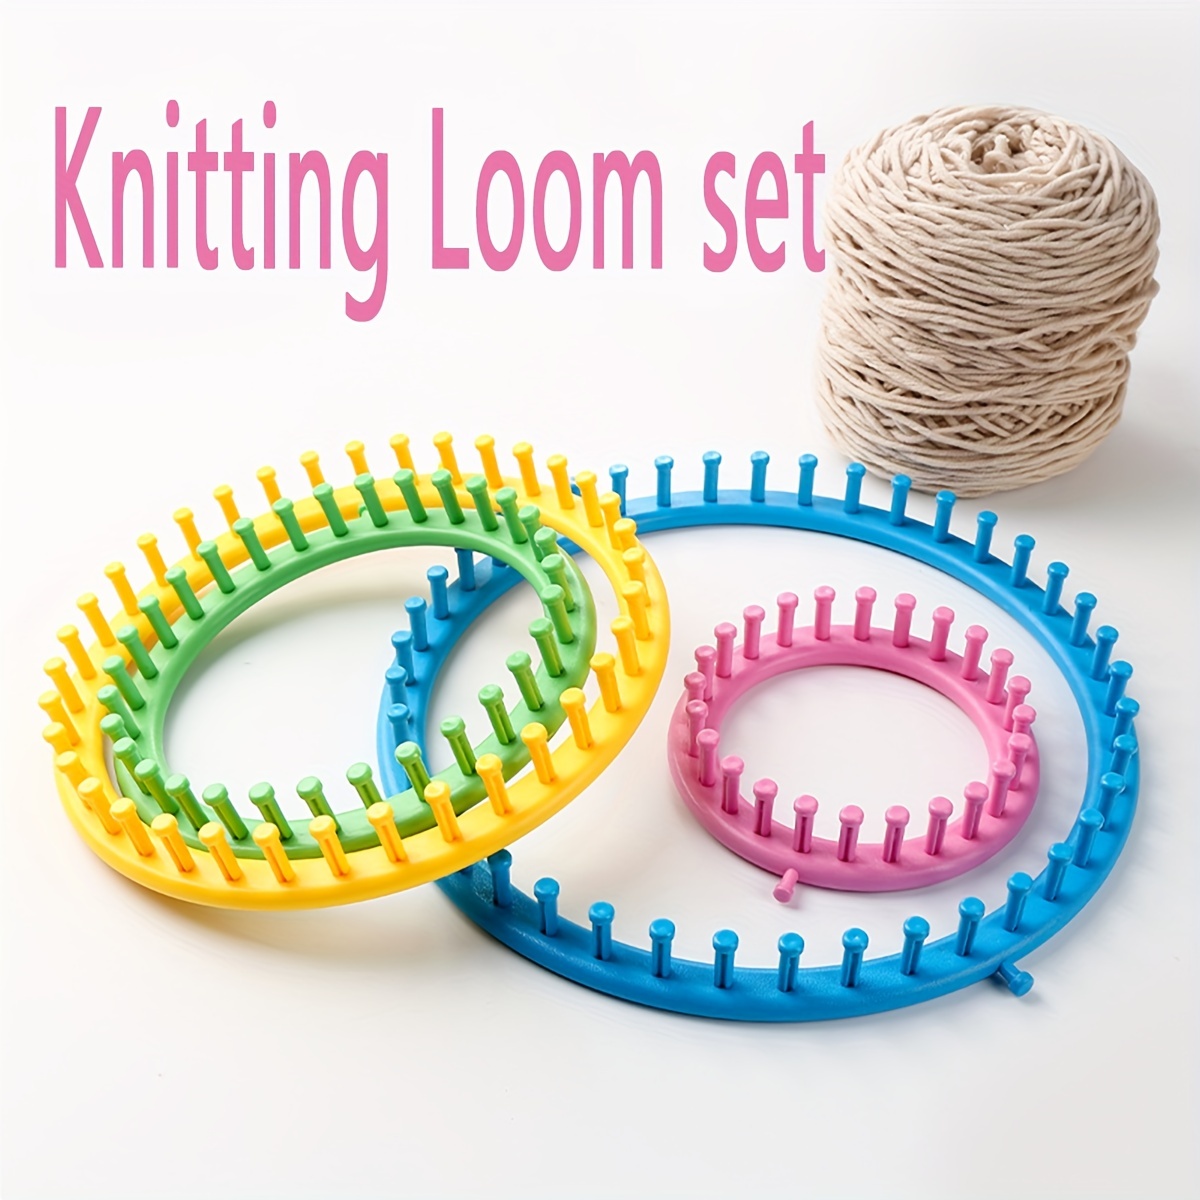 Jamit Round Knitting Looms Set Craft Kit DIY Tool with Hook Needle, Set of 5 Plastic Looms Knitting for Hat Scarf Shawl Sweater Sock and Blankets